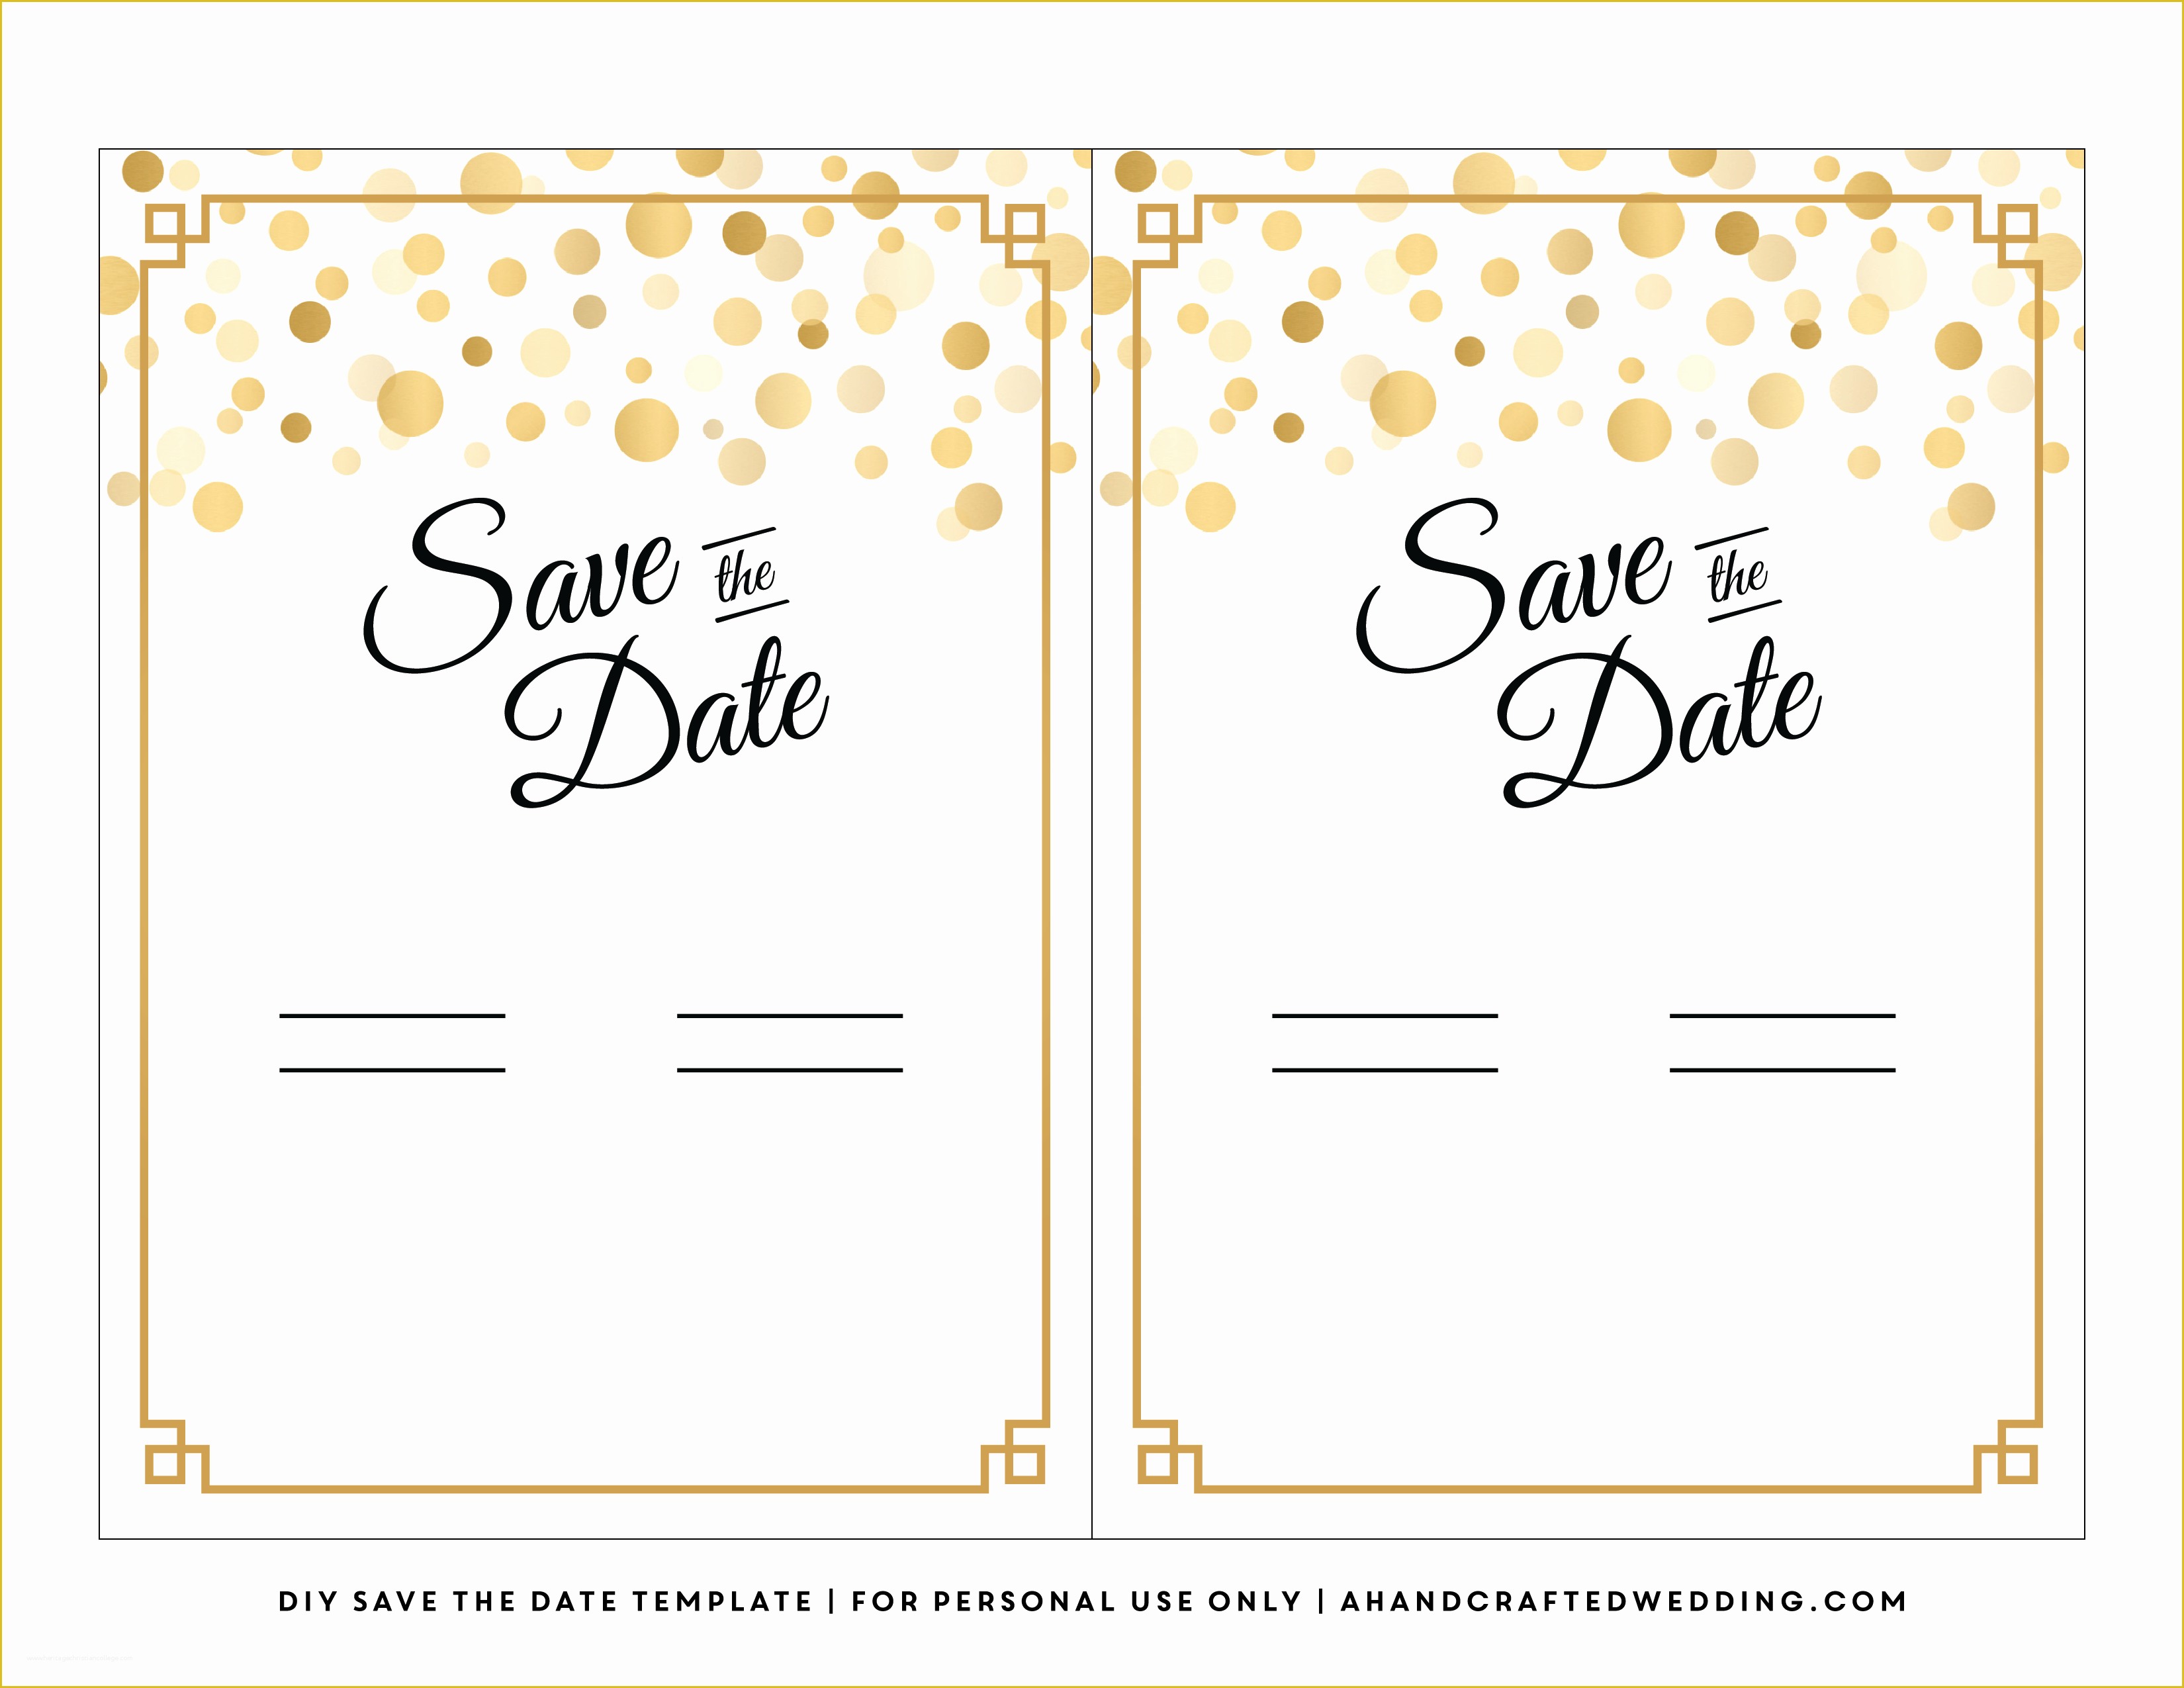 Free Printable Save the Date Templates Of 7 Best Of Diy Save the Date Template Halloween